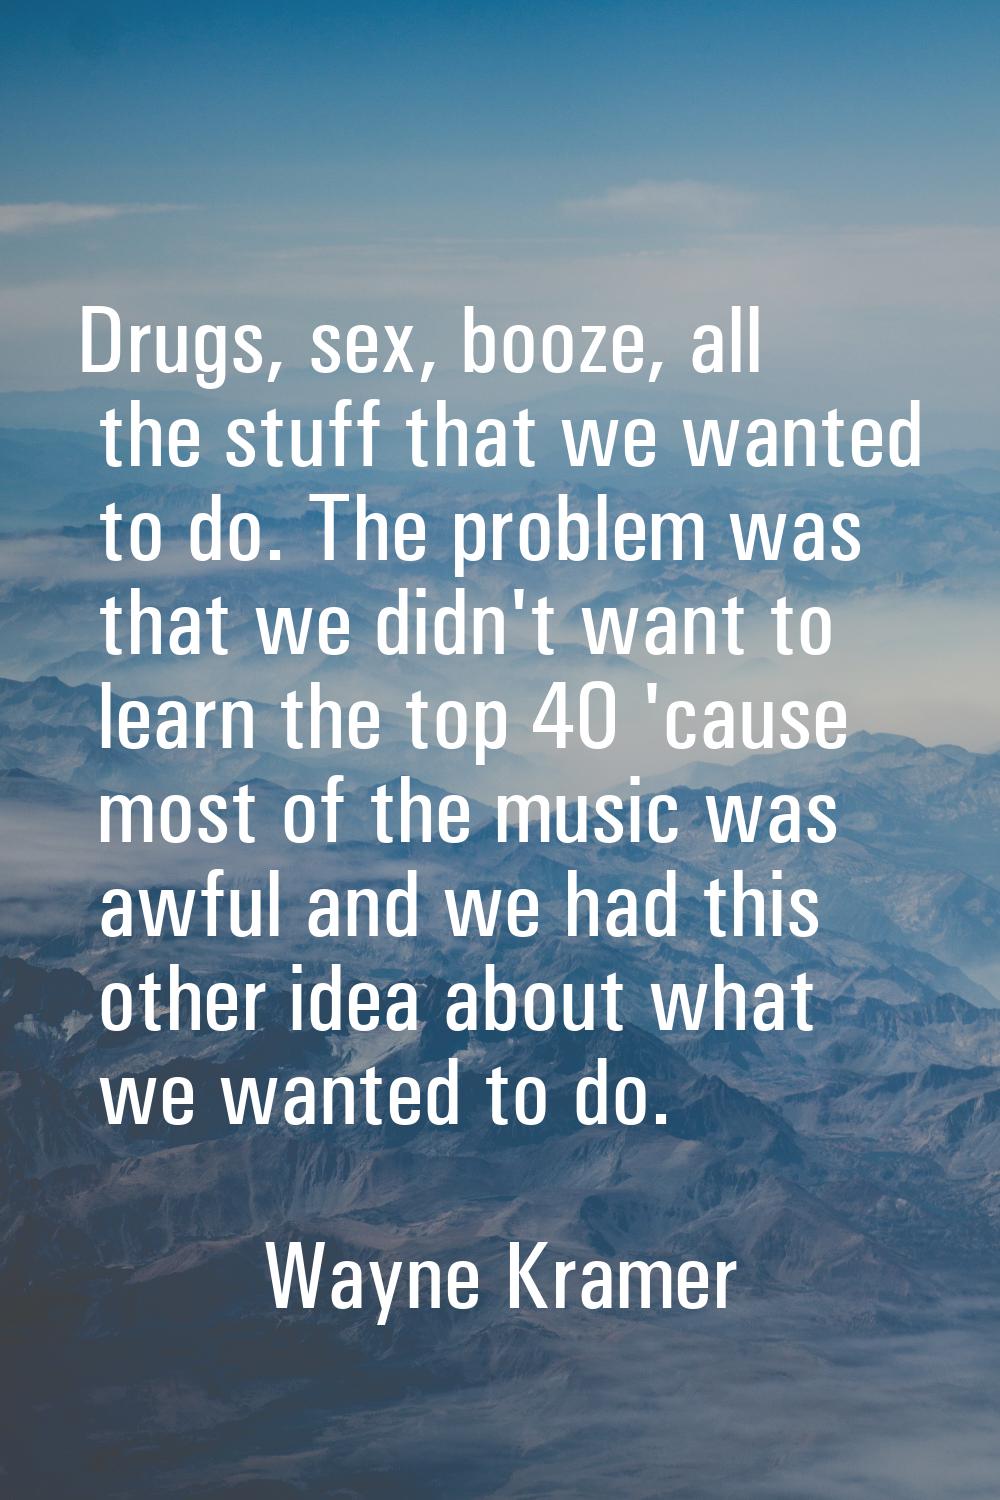 Drugs, sex, booze, all the stuff that we wanted to do. The problem was that we didn't want to learn